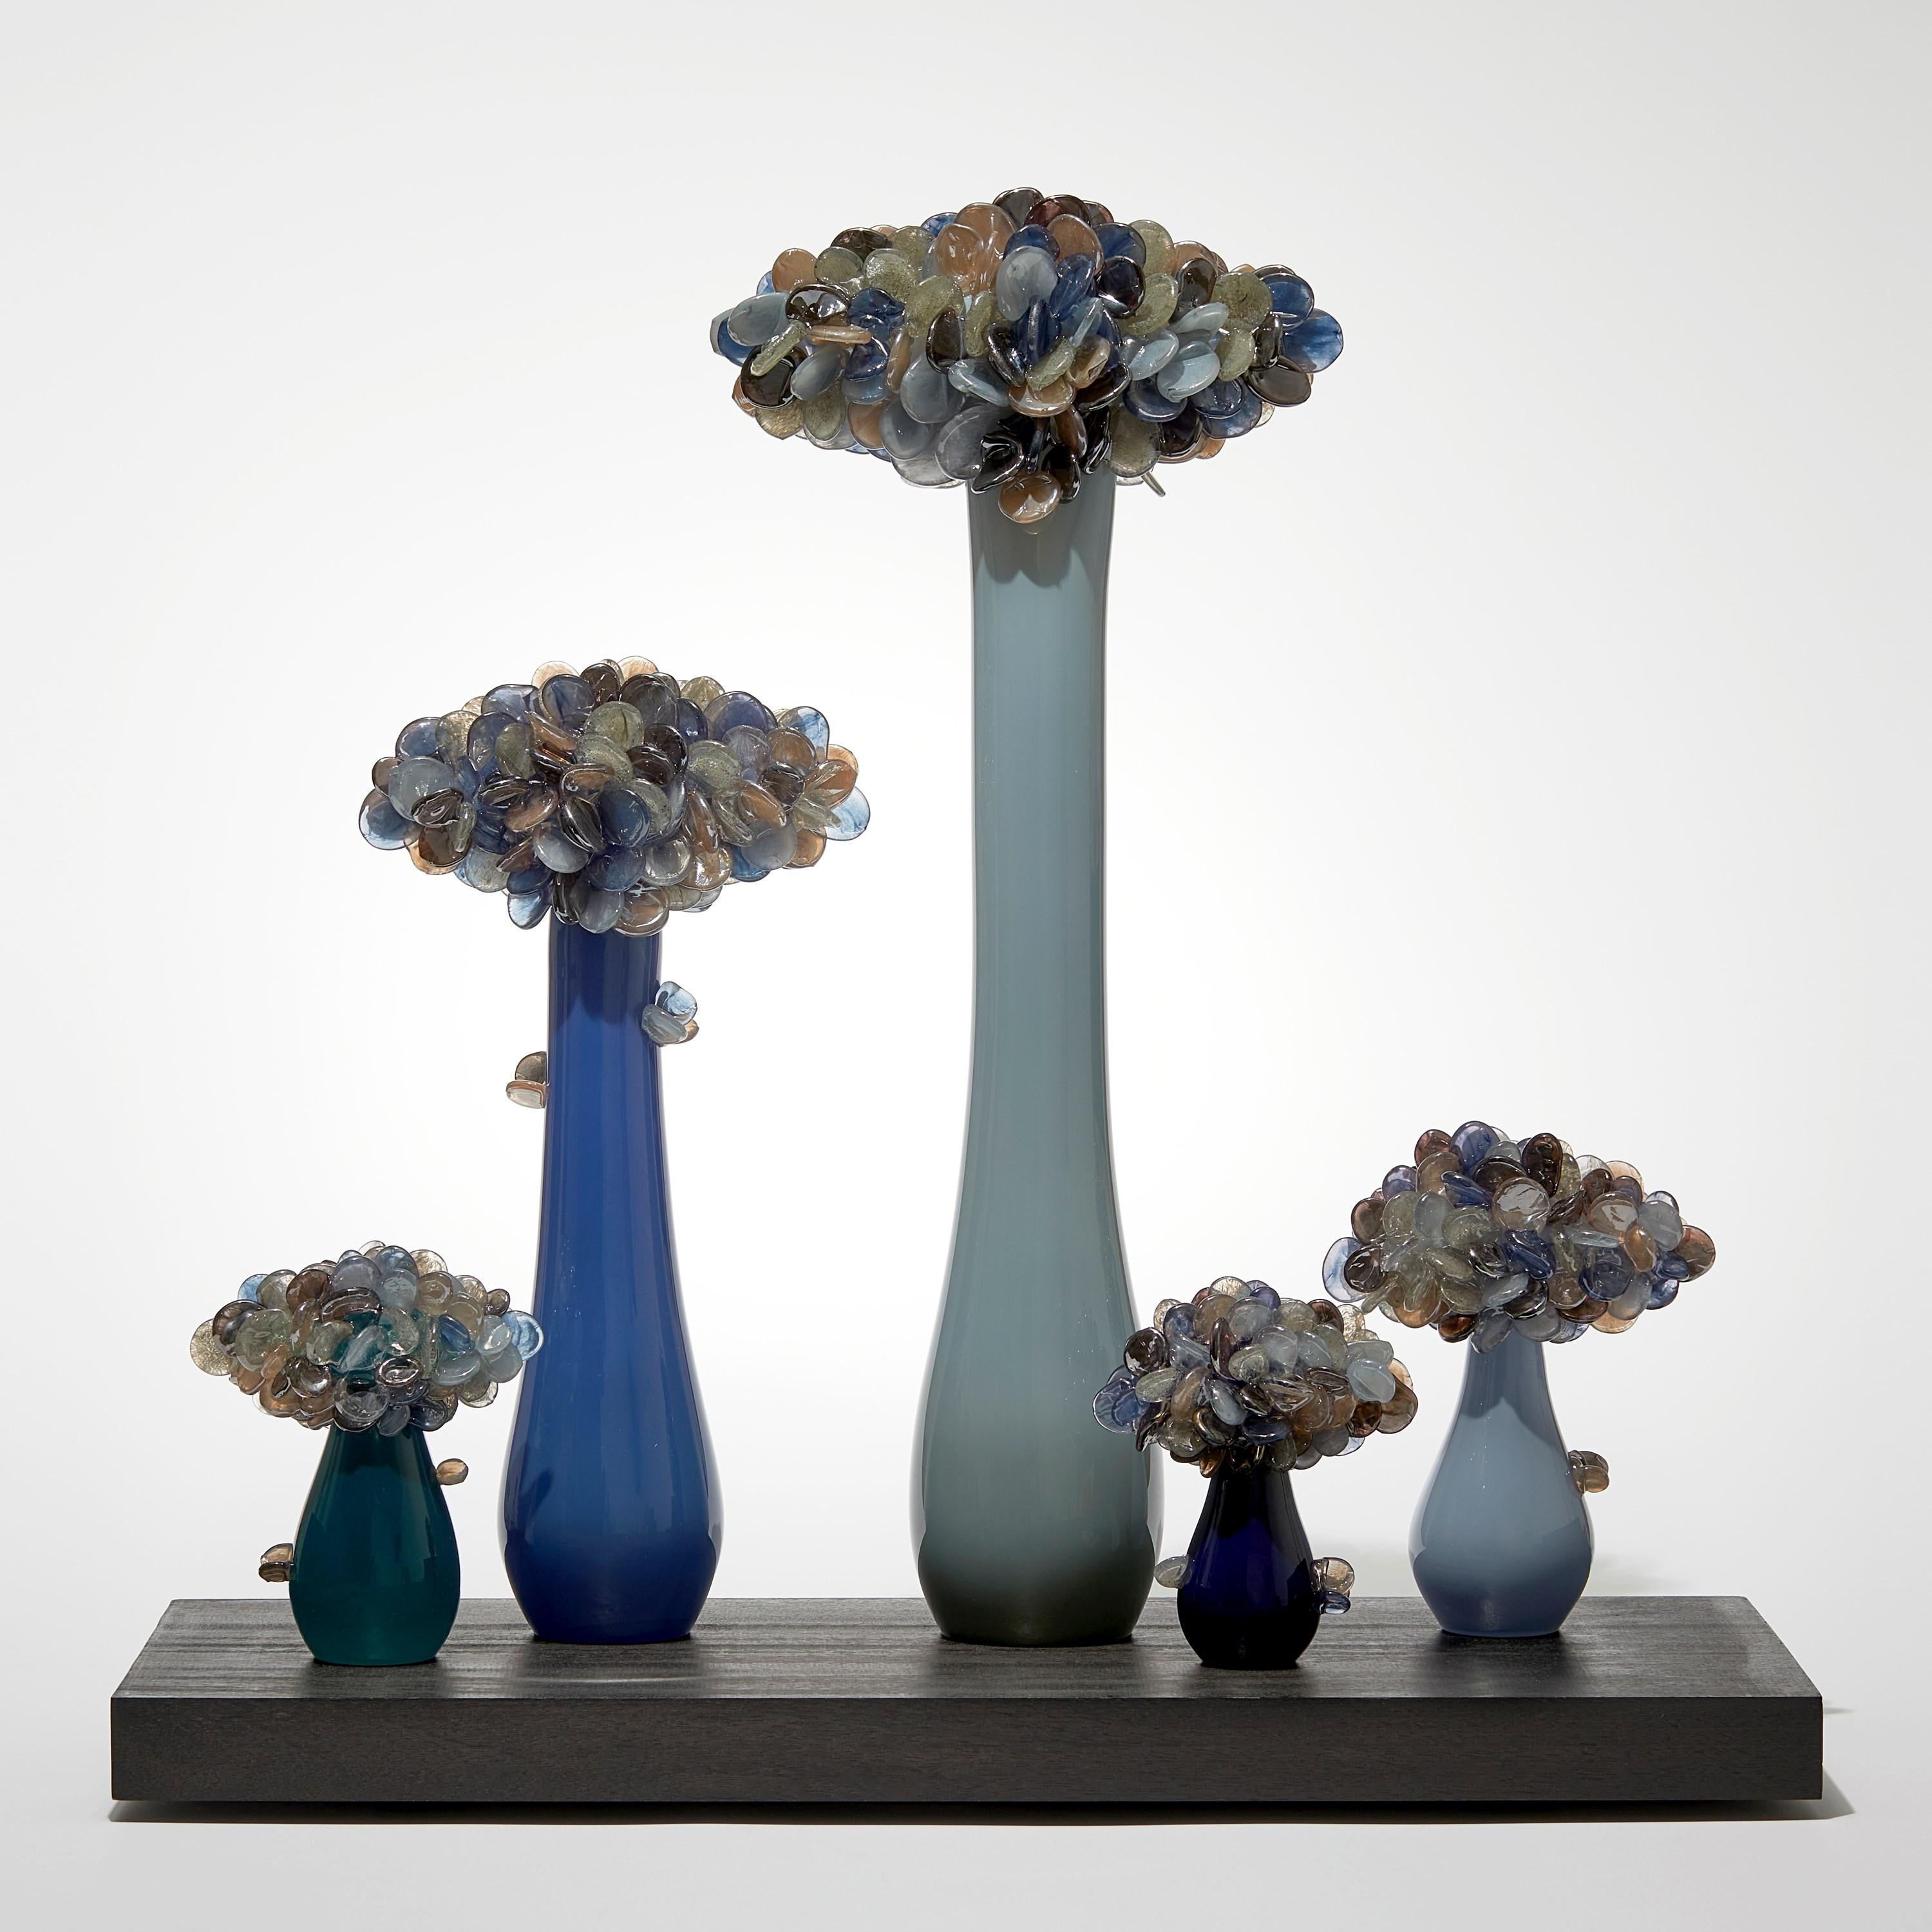 'Enchanted Mori Dusk' is a unique sculpted glass installation by the British artist, Louis Thompson.

Thompson's Enchanted Mori are inspired by the practice of bonsai, echoing its artistic intention to create a higher level of aesthetic refinement.